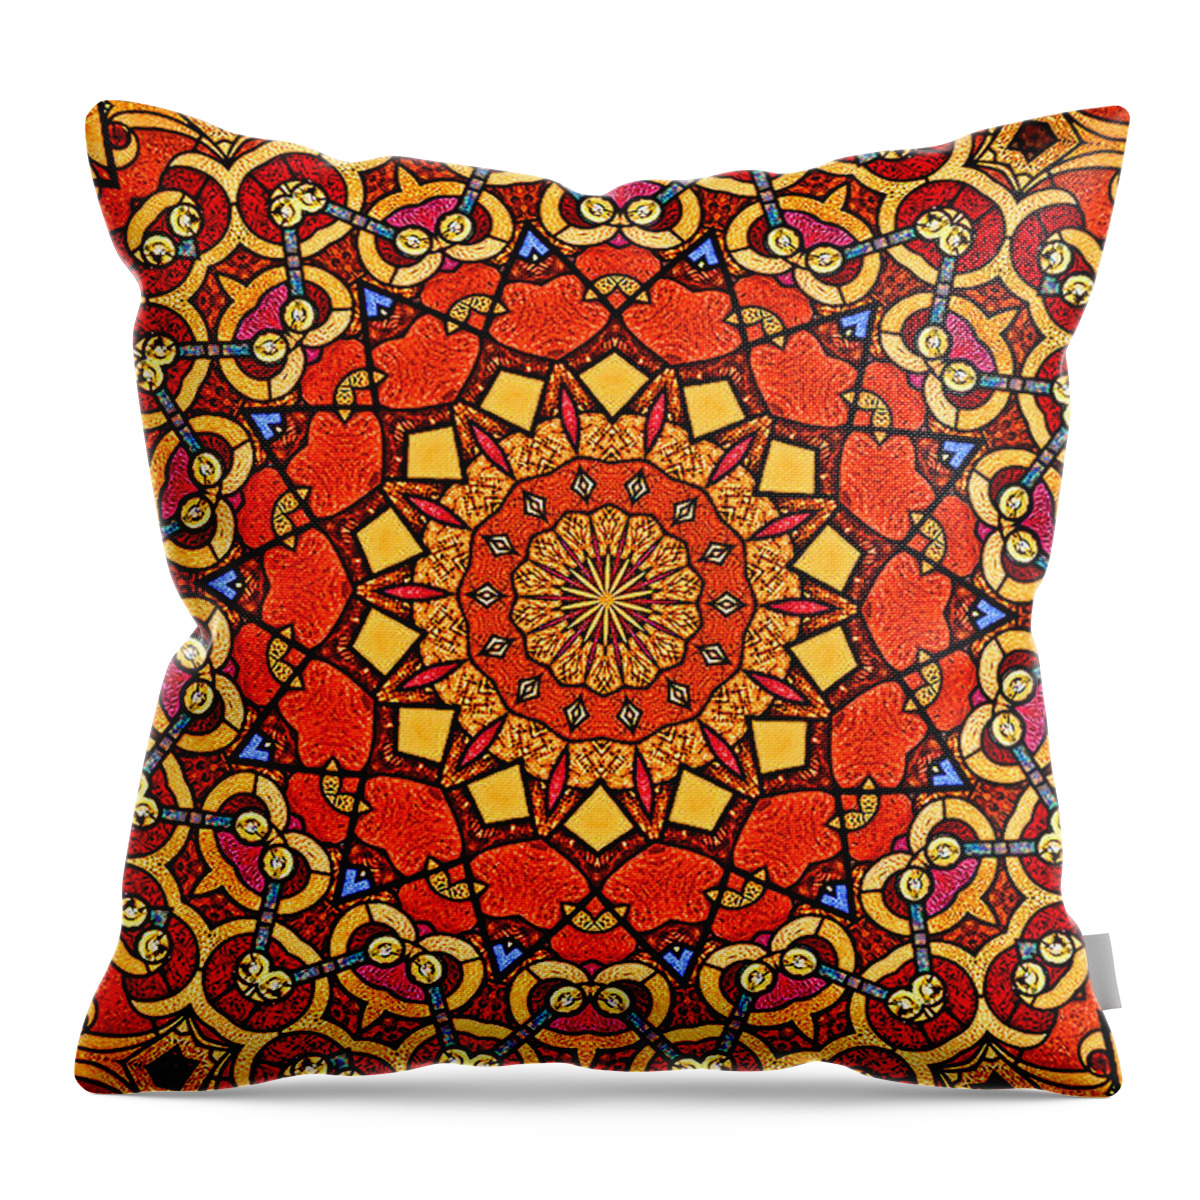 Kaleidoscope Throw Pillow featuring the photograph Stained Glass Kaleidoscope by Anna Louise